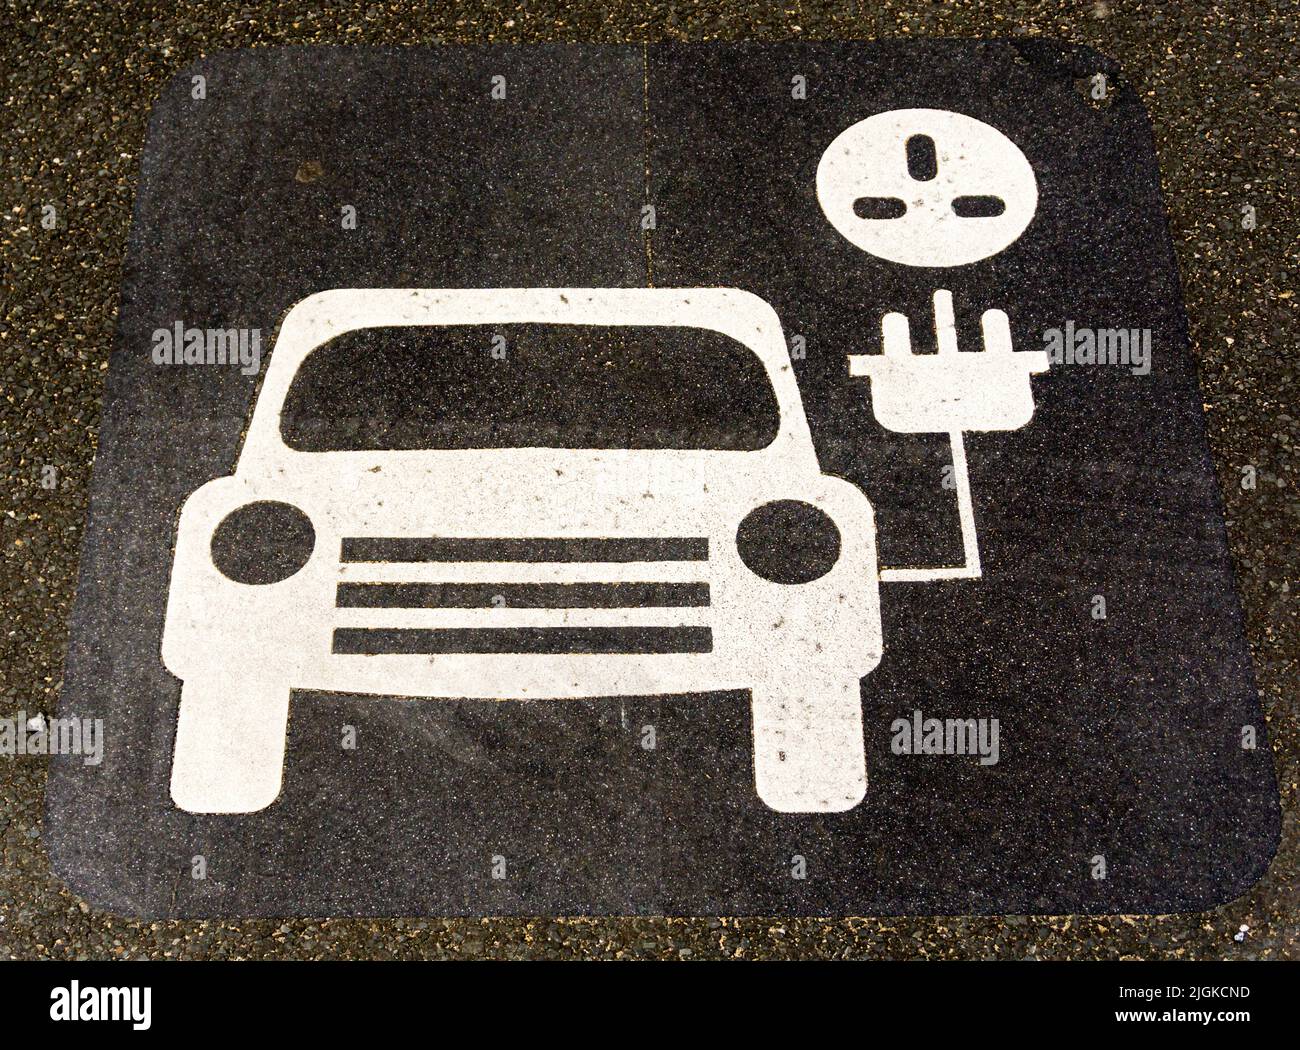 Sign painted on asphalt of road in car park to show an electric vehicle recharging point. Stock Photo